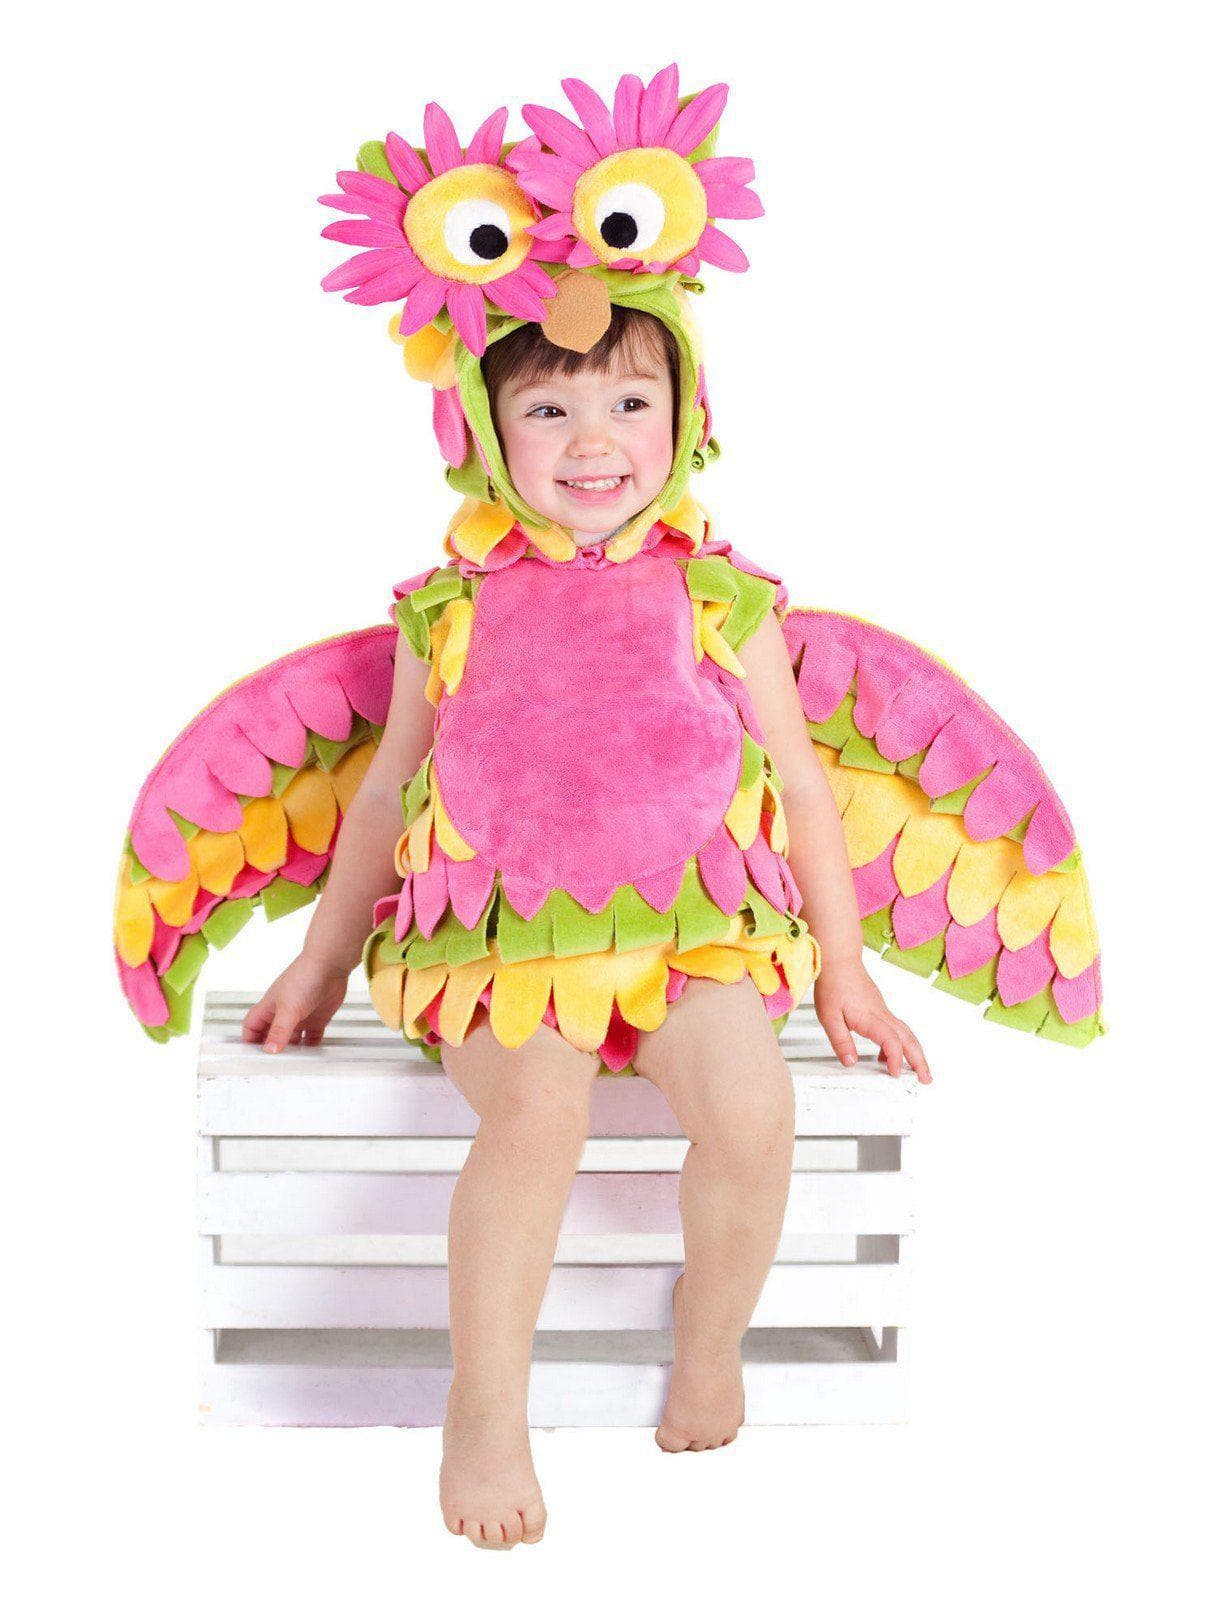 Baby/Toddler Holly the Owl Costume - costumes.com